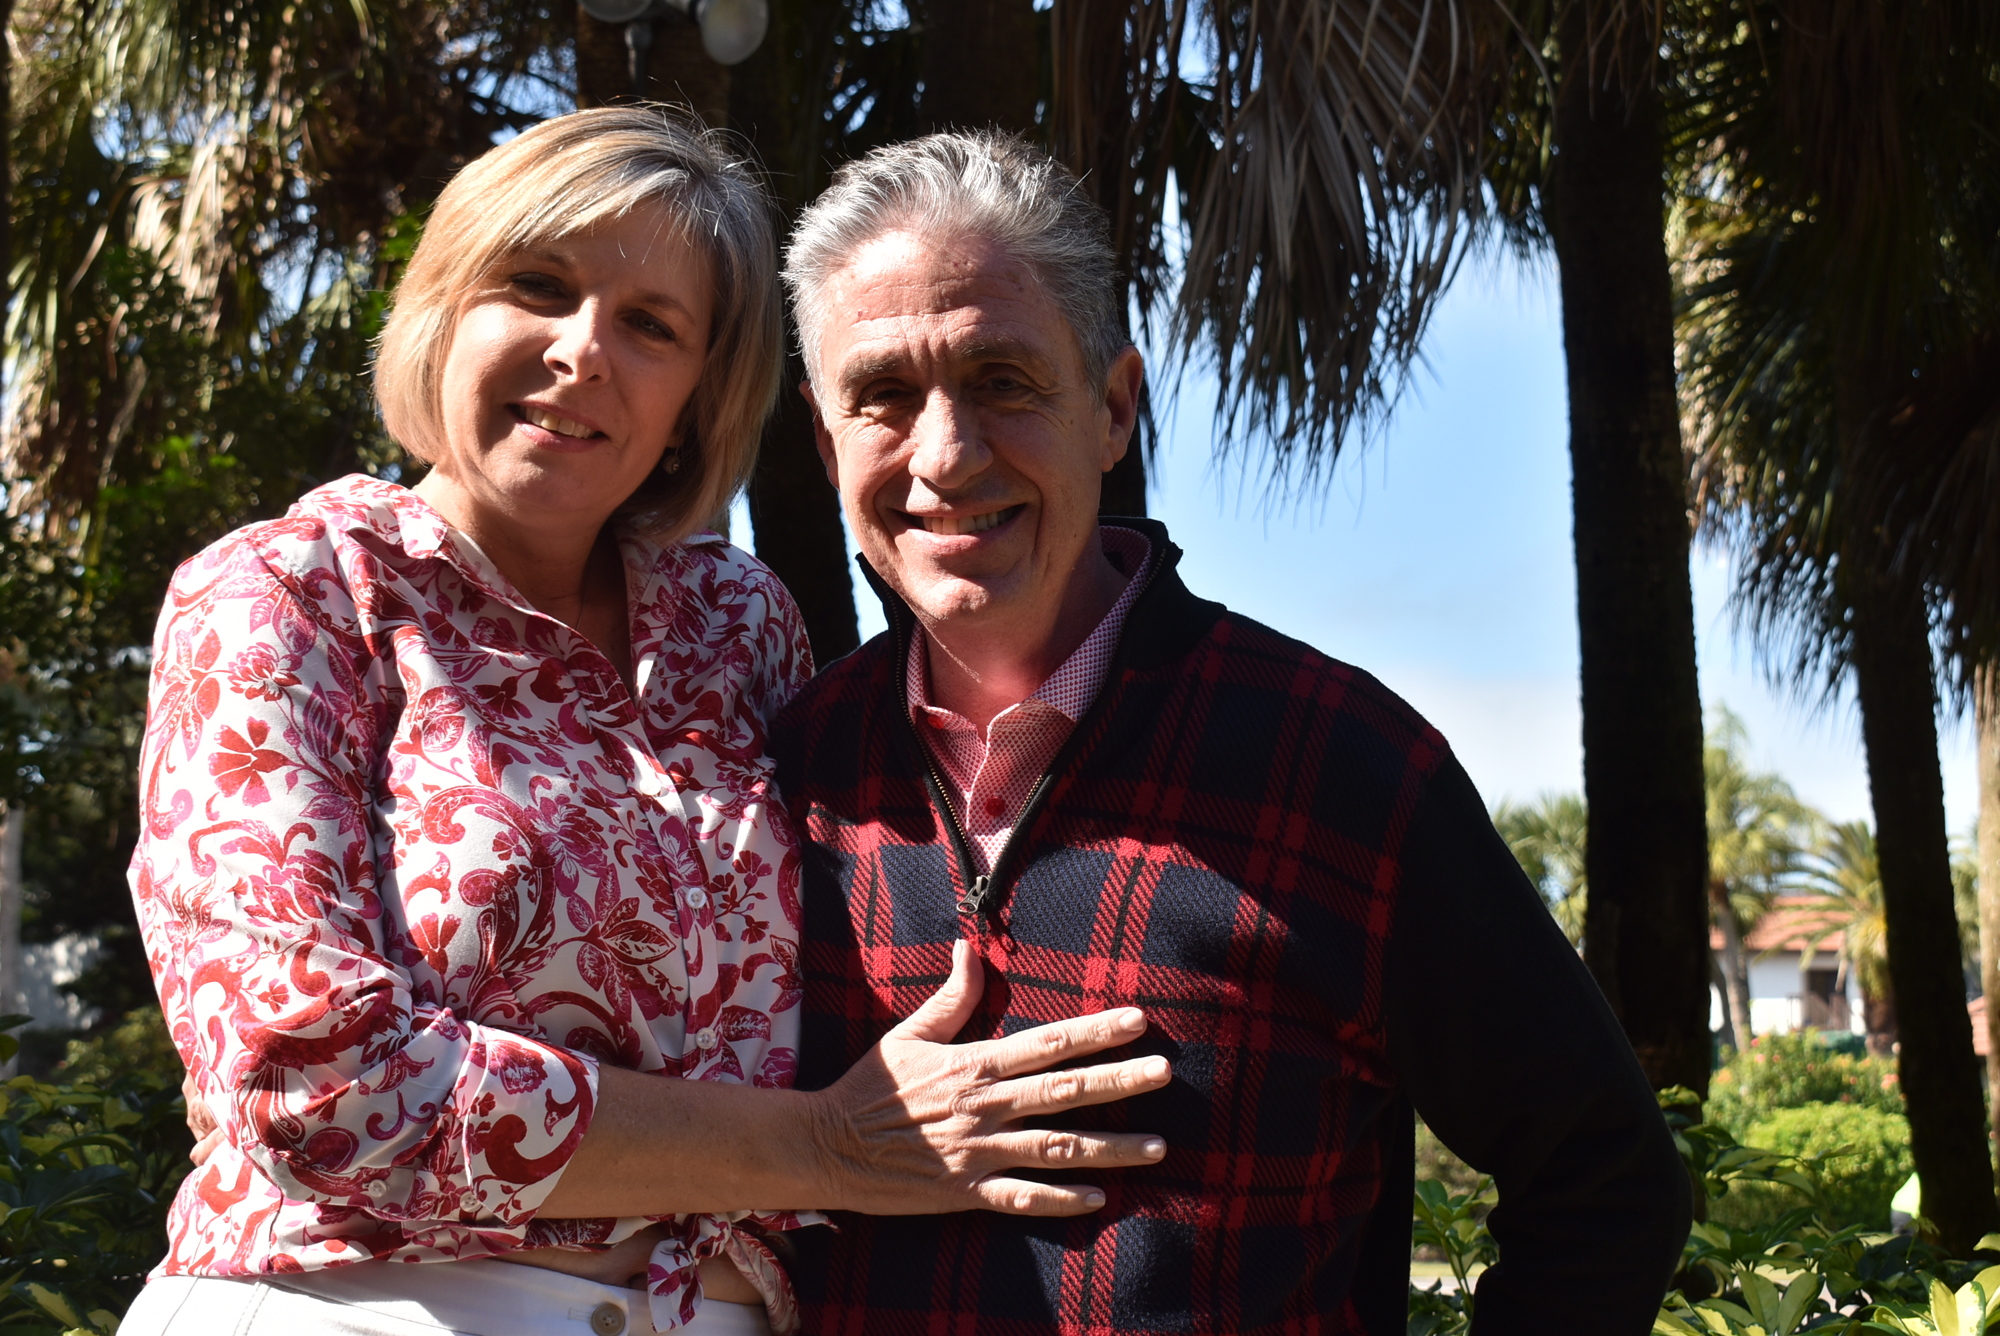 Catherine and Michael Garey head the Lazy Lobster on Longboat Key, which will have specials for Valentine's Day.